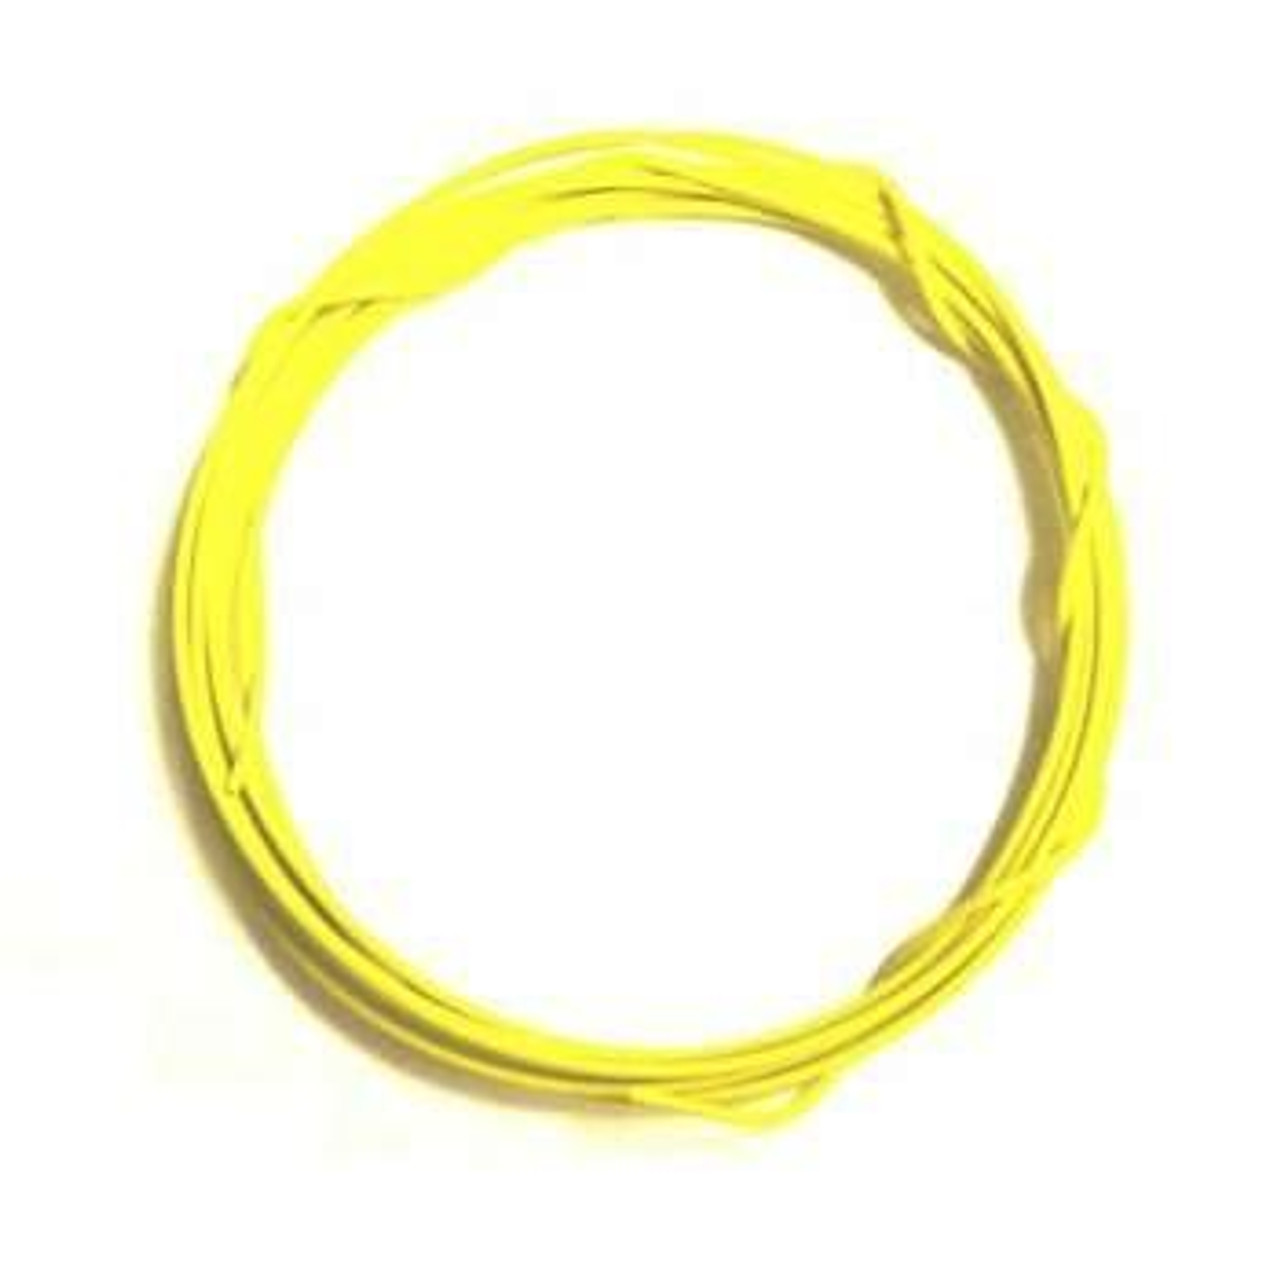 WIRE26-YEL Graves RC Hobbies 26 Gauge Wire - Yellow - 1 ft. - Graves RC  Hobbies